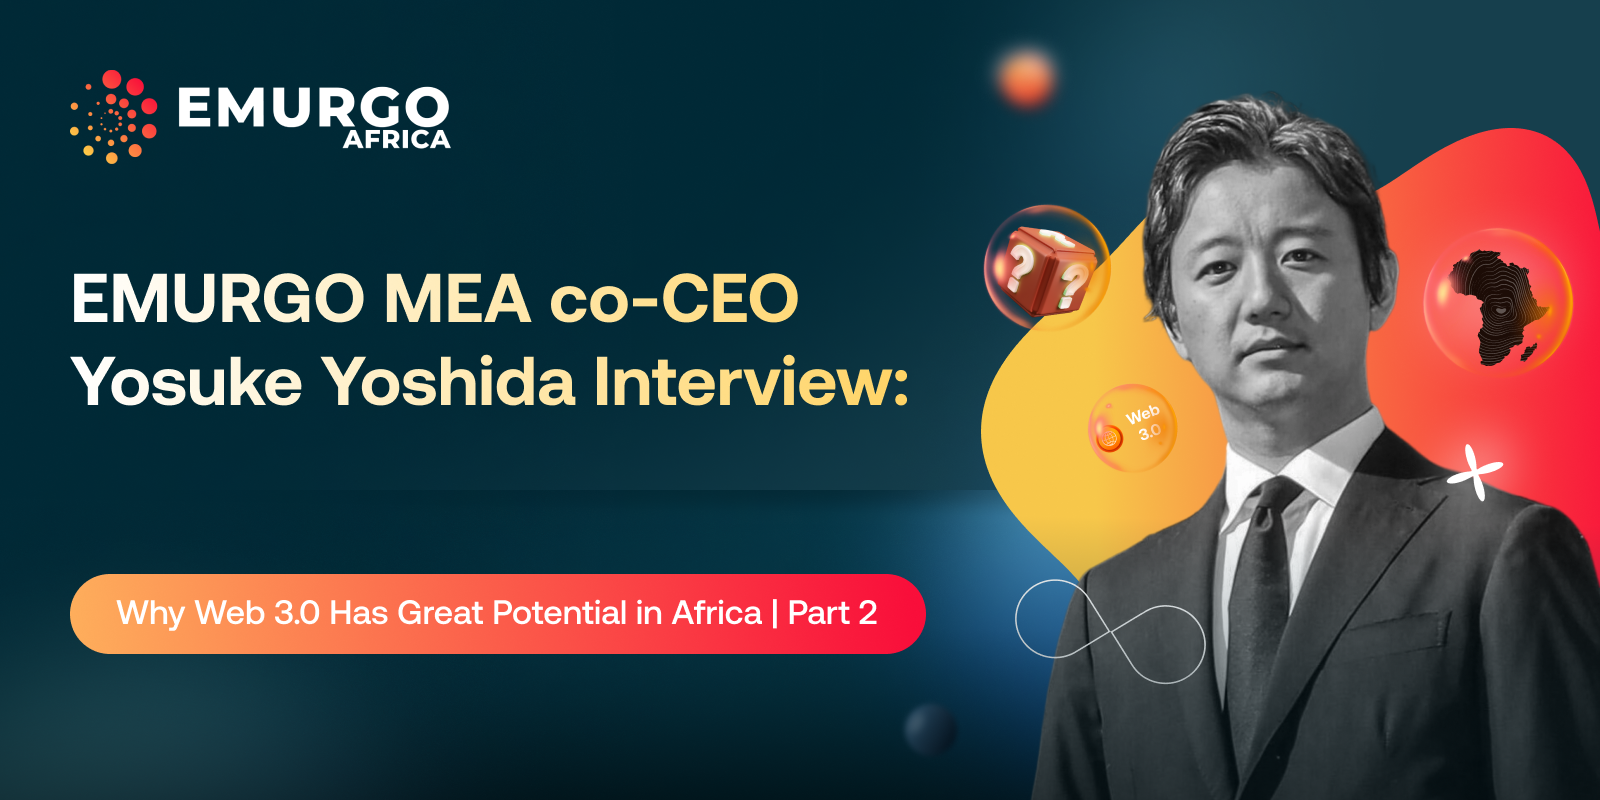 EMURGO MEA co-CEO Yosuke Yoshida Interview: Why Web3 Has Great Potential in Africa: (Part 2)